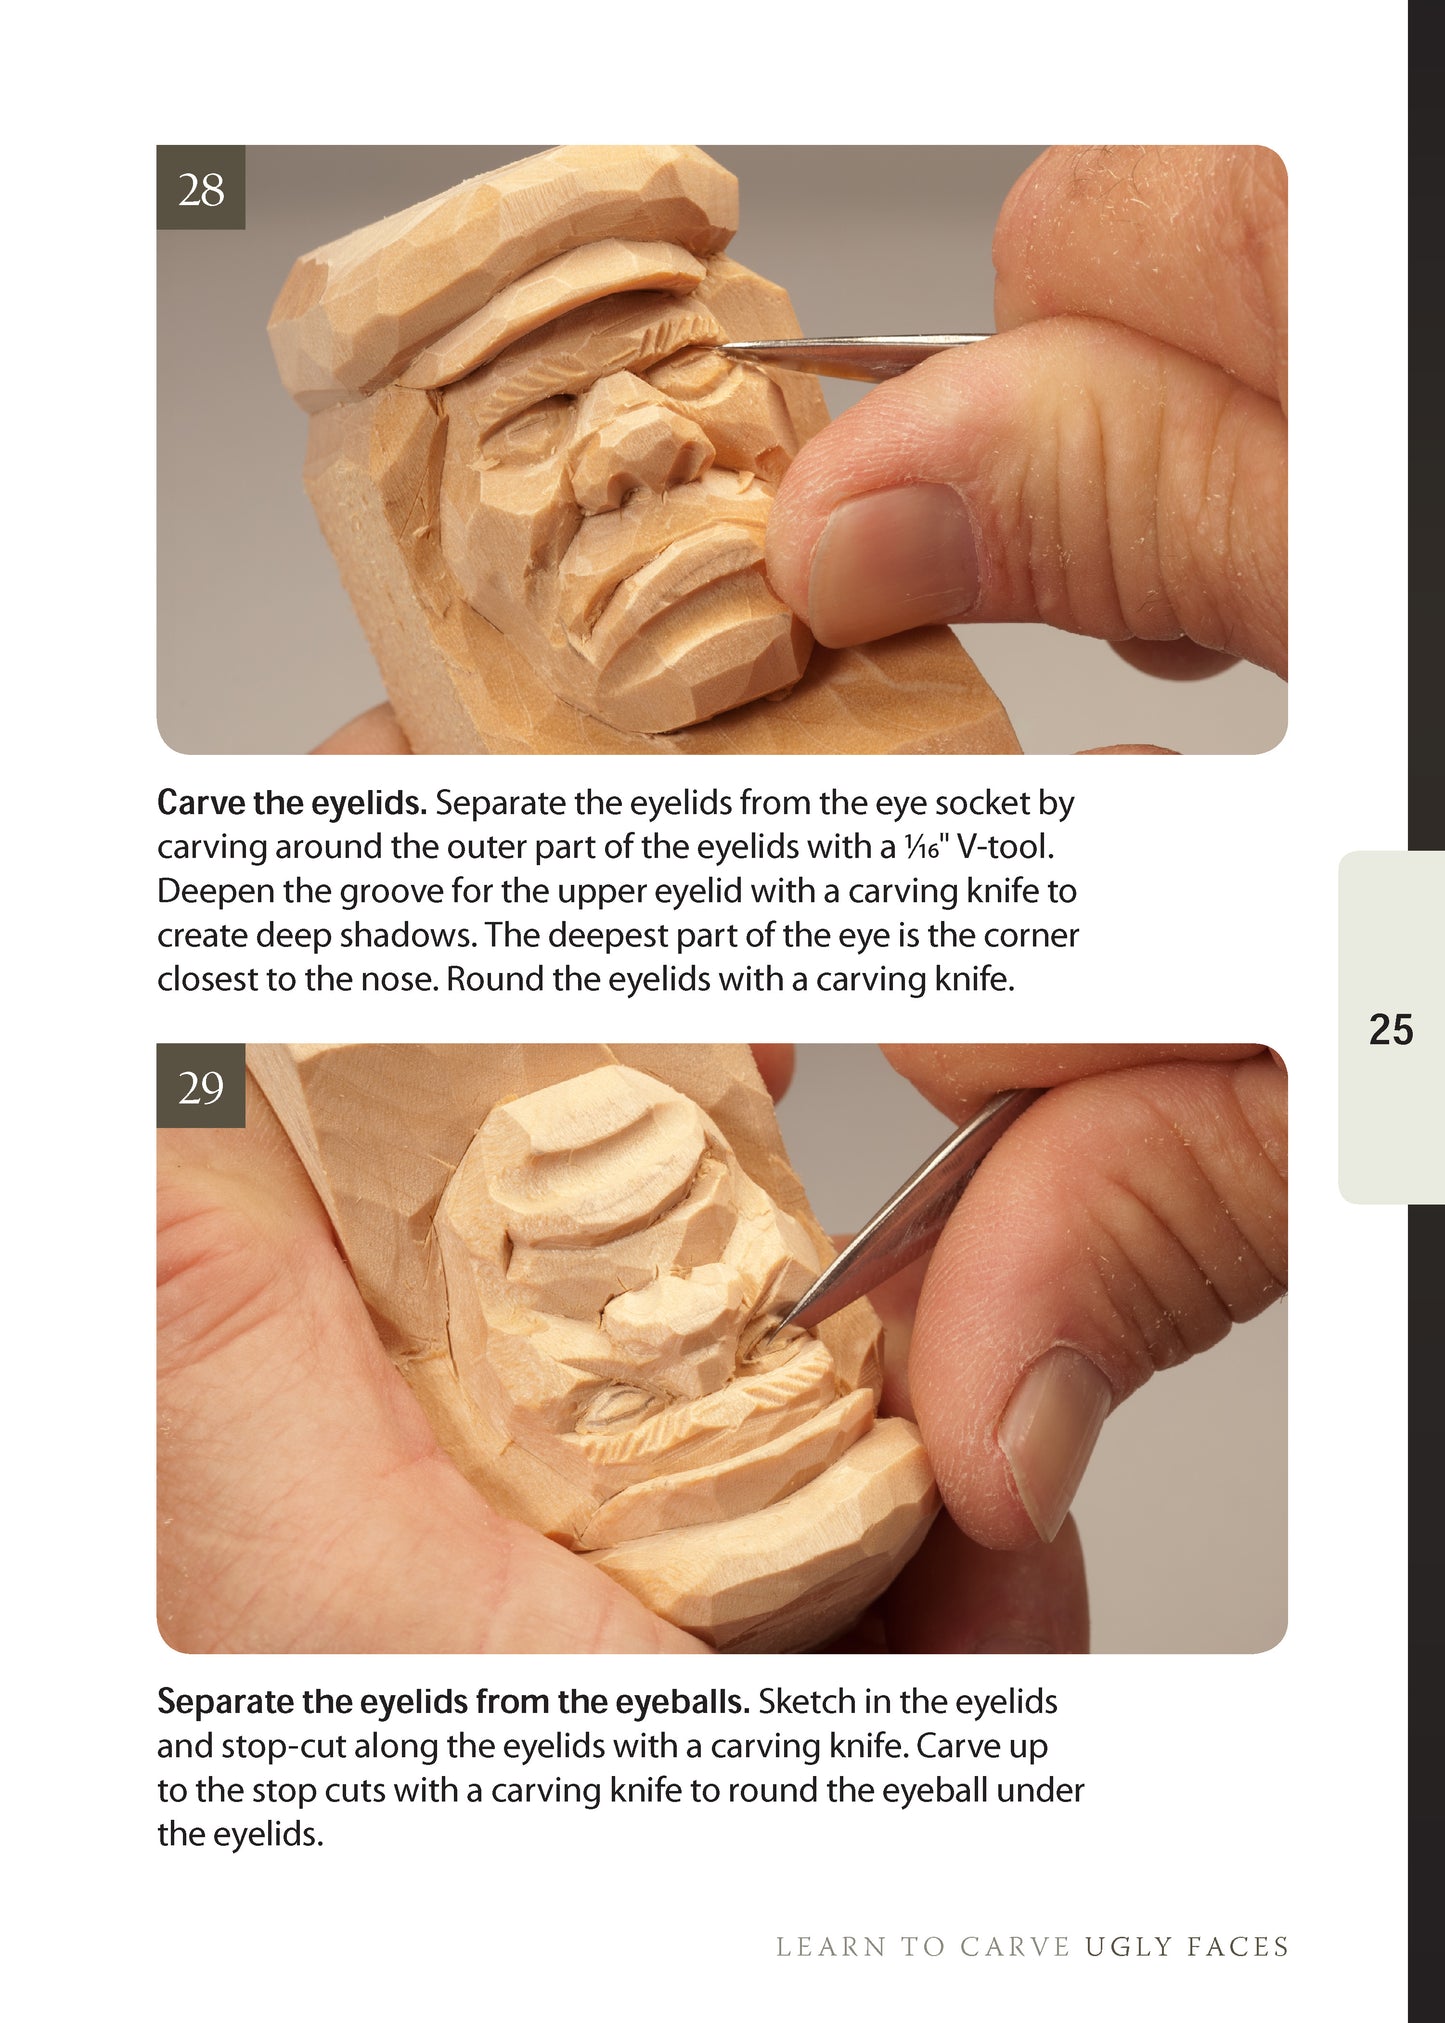 Learn to Carve Ugly Faces (Booklet)